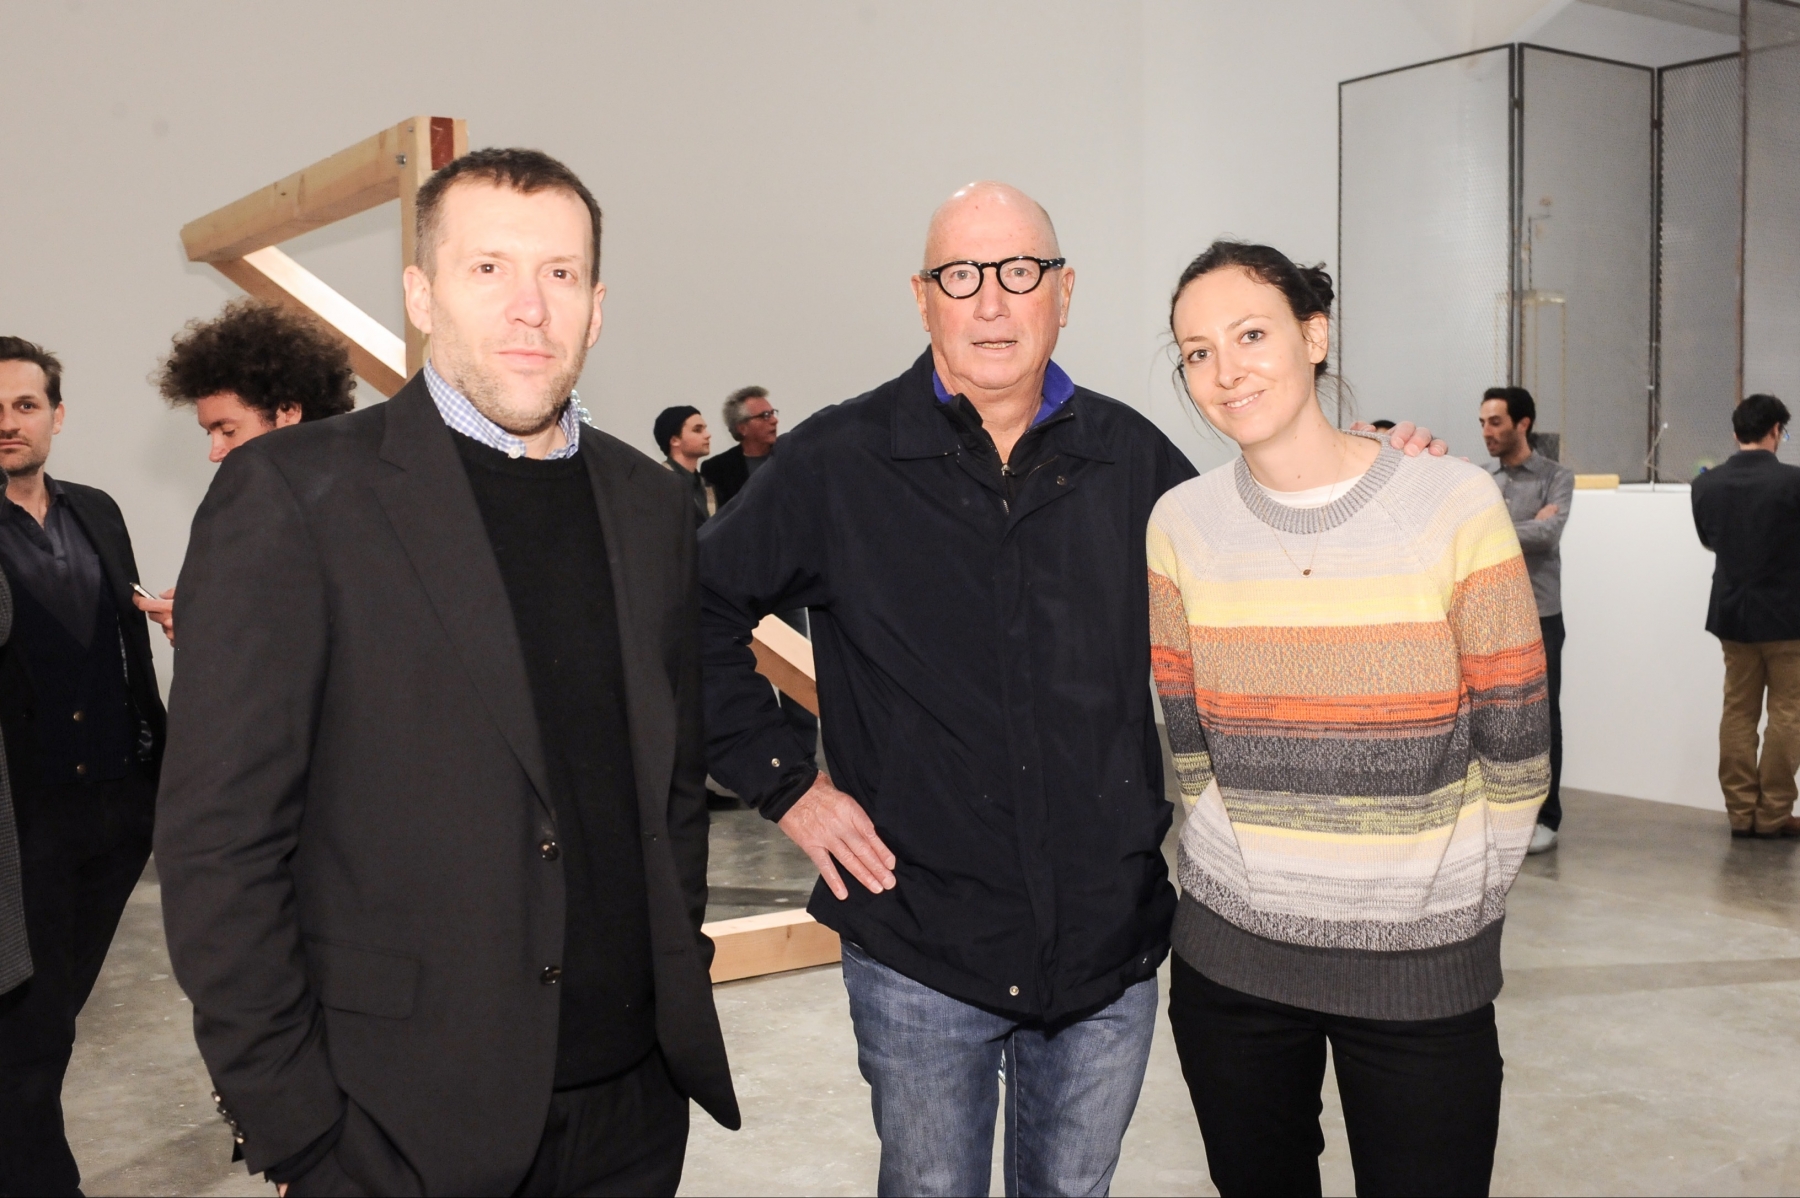 Bill Griffin, James Corcoran, and Maggie Kayne at the opening